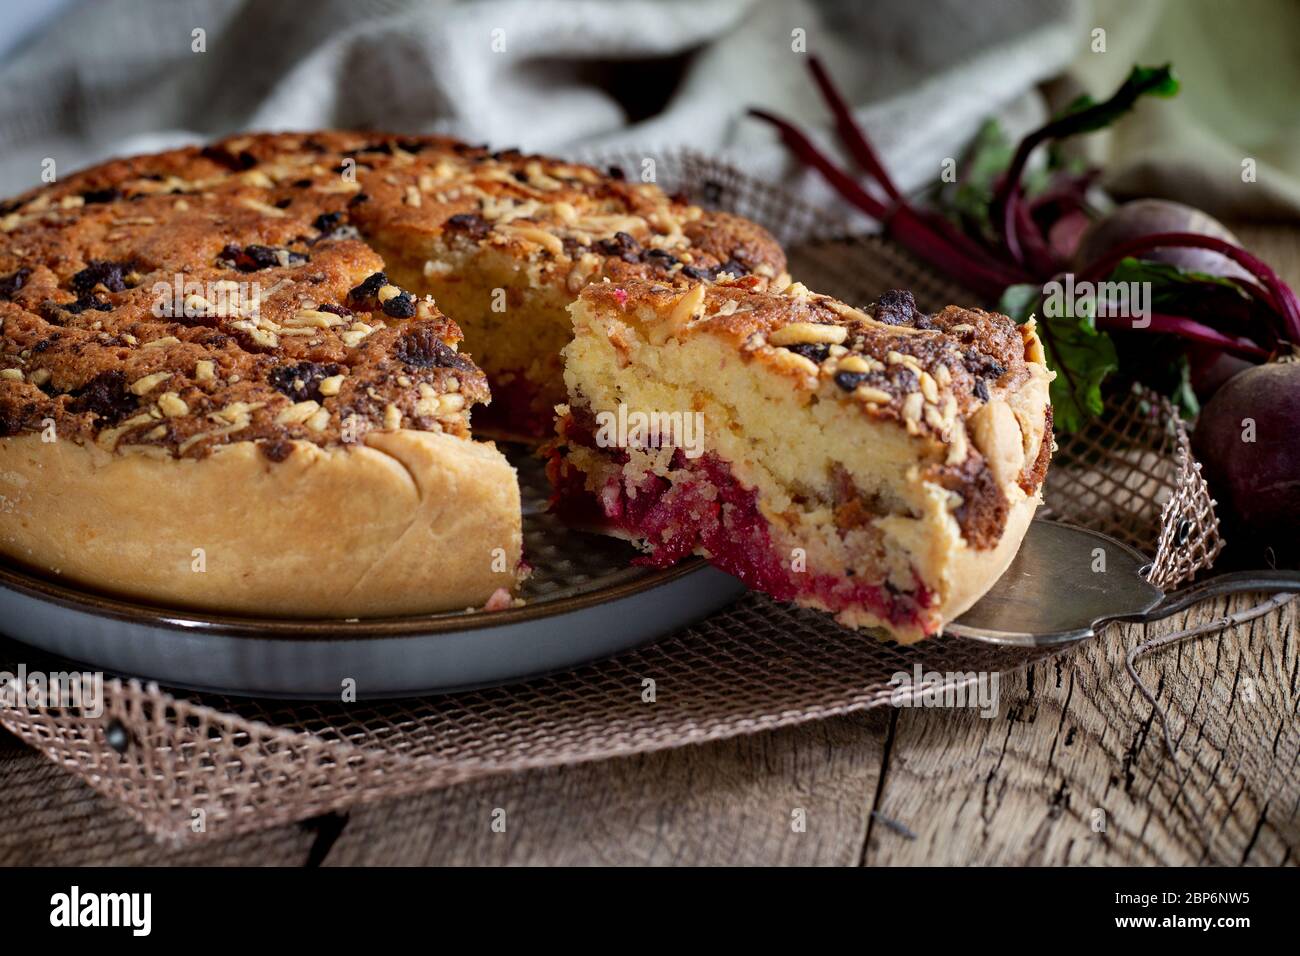 Homemade delicious beetroot pastry tart on kitchen grill with slice of cake and fresh beetroots on rustic wooden bakground. Menu, board, banner. Vintage traditional rustic kitchen. British meal Stock Photo